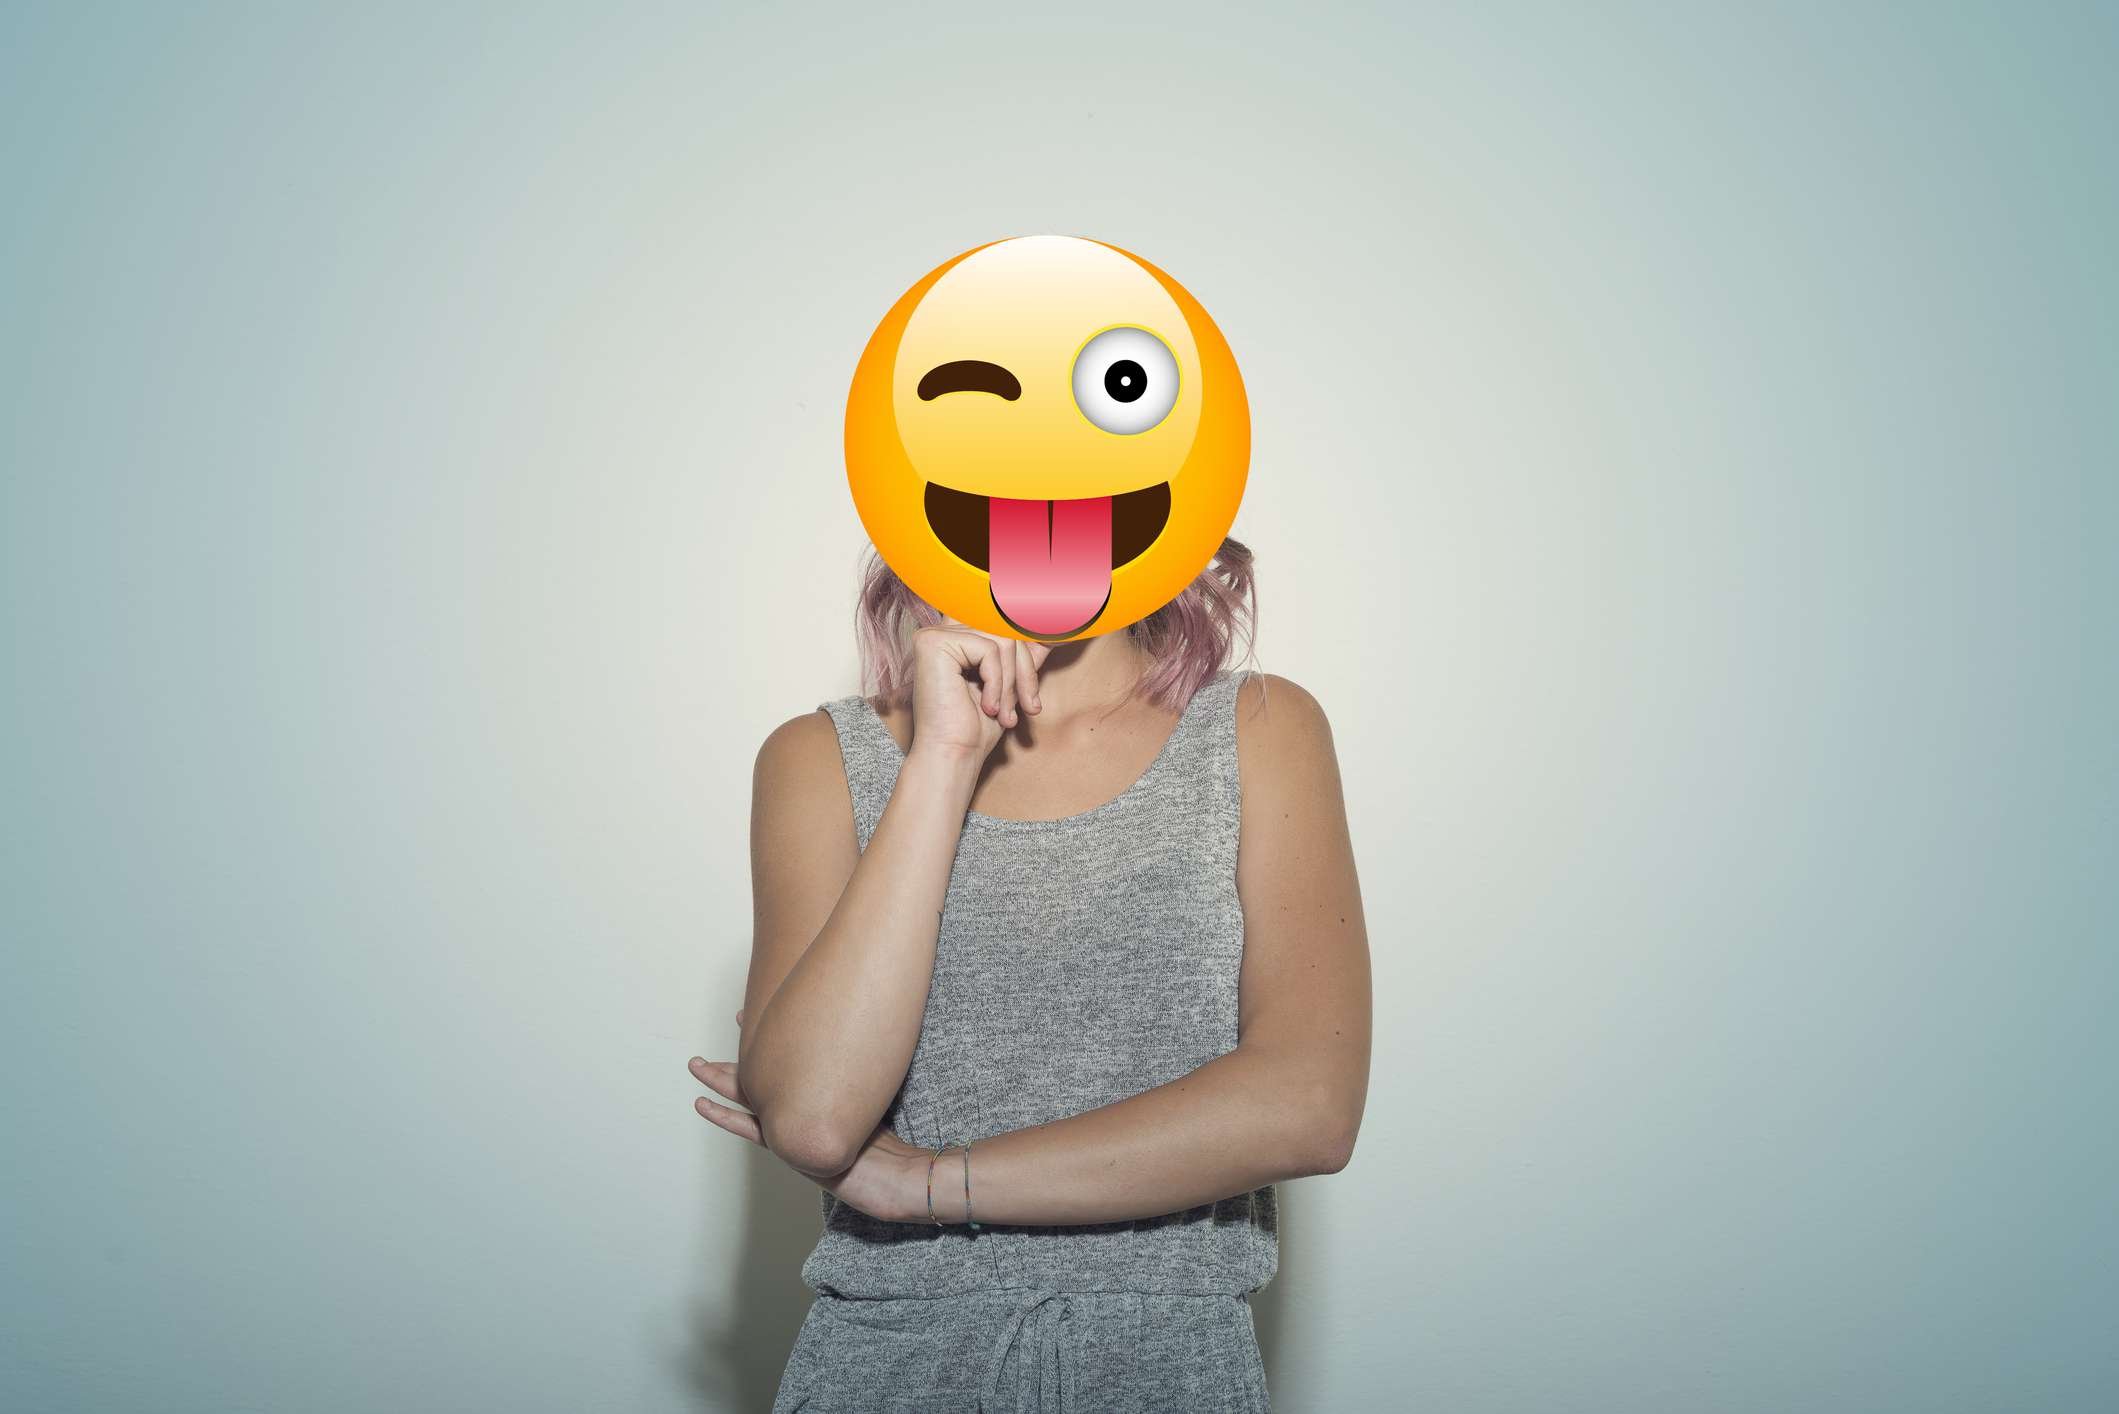 a33d7 emoji face 1005853236 ae8b32a26f5943019e43e9e5922114c9 - open relationships and non-monogamous dating app